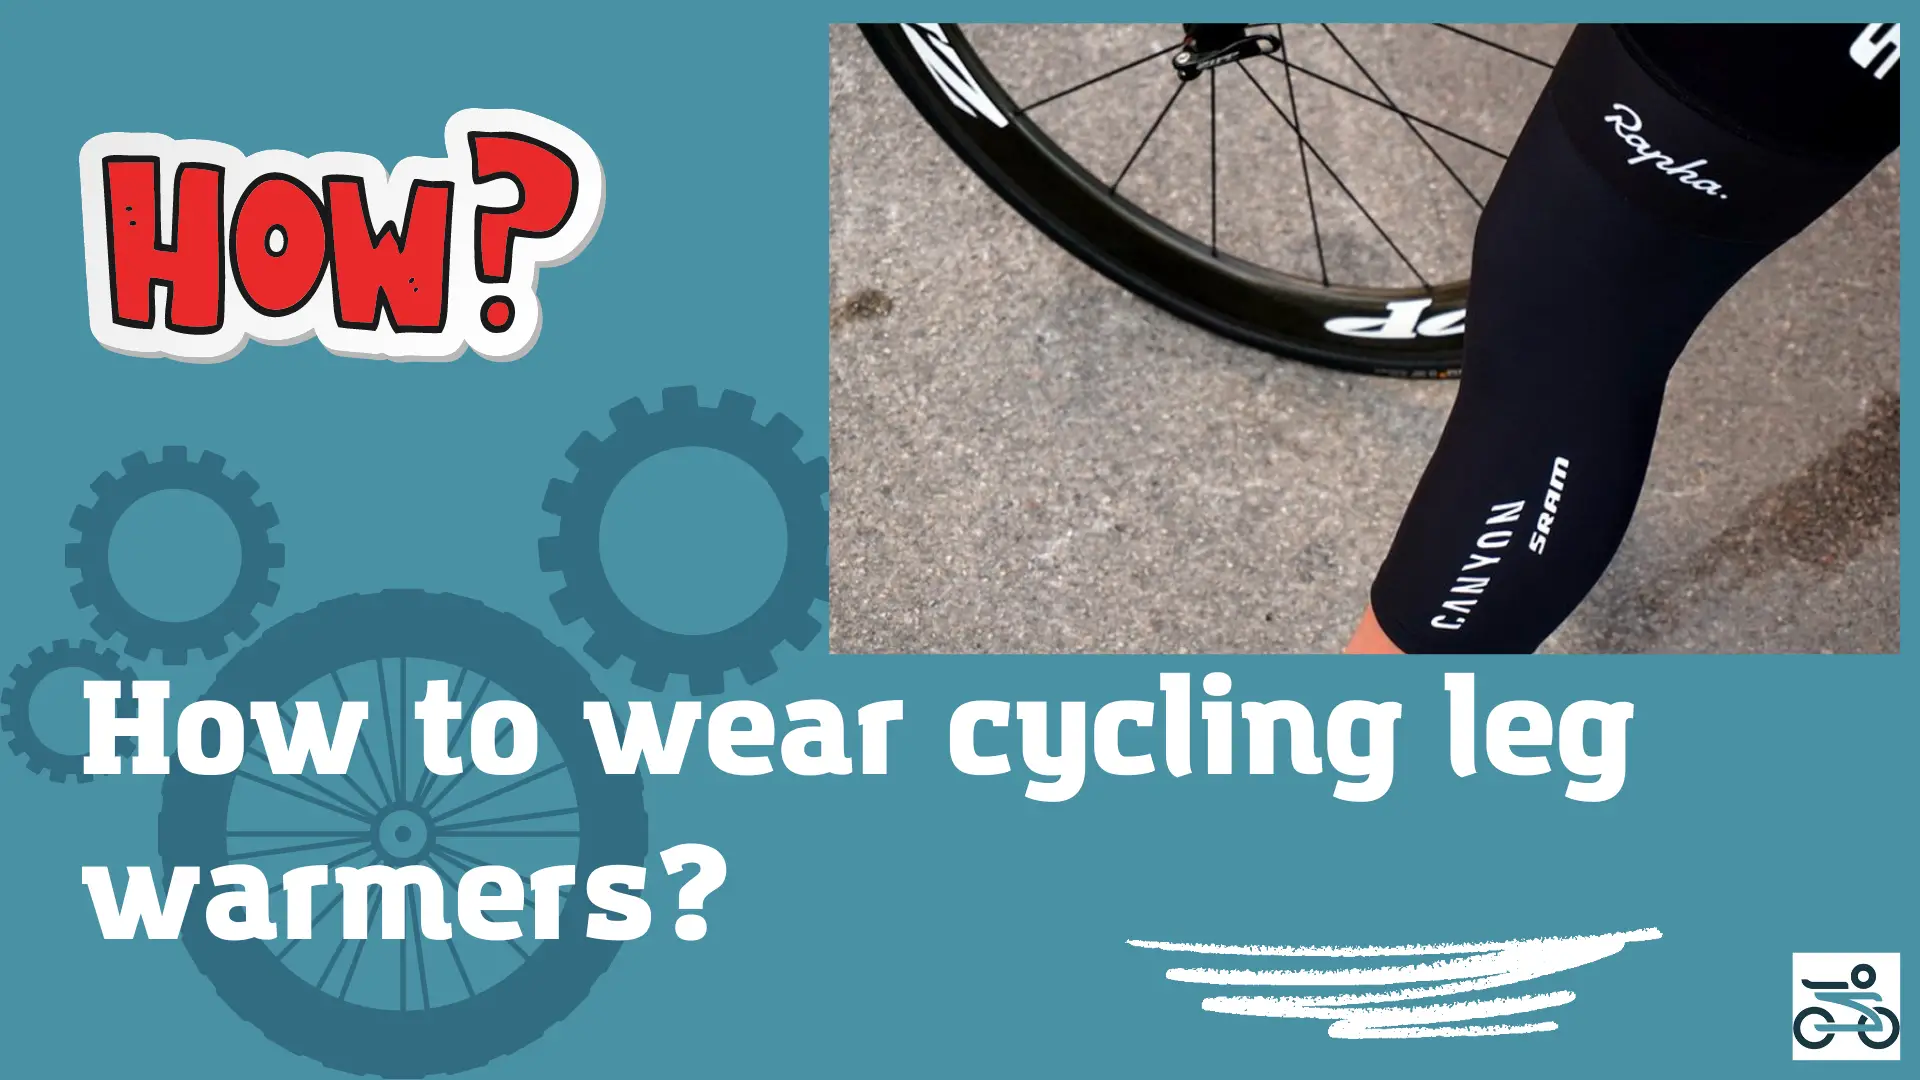 How to wear cycling leg warmers? - Basic concepts